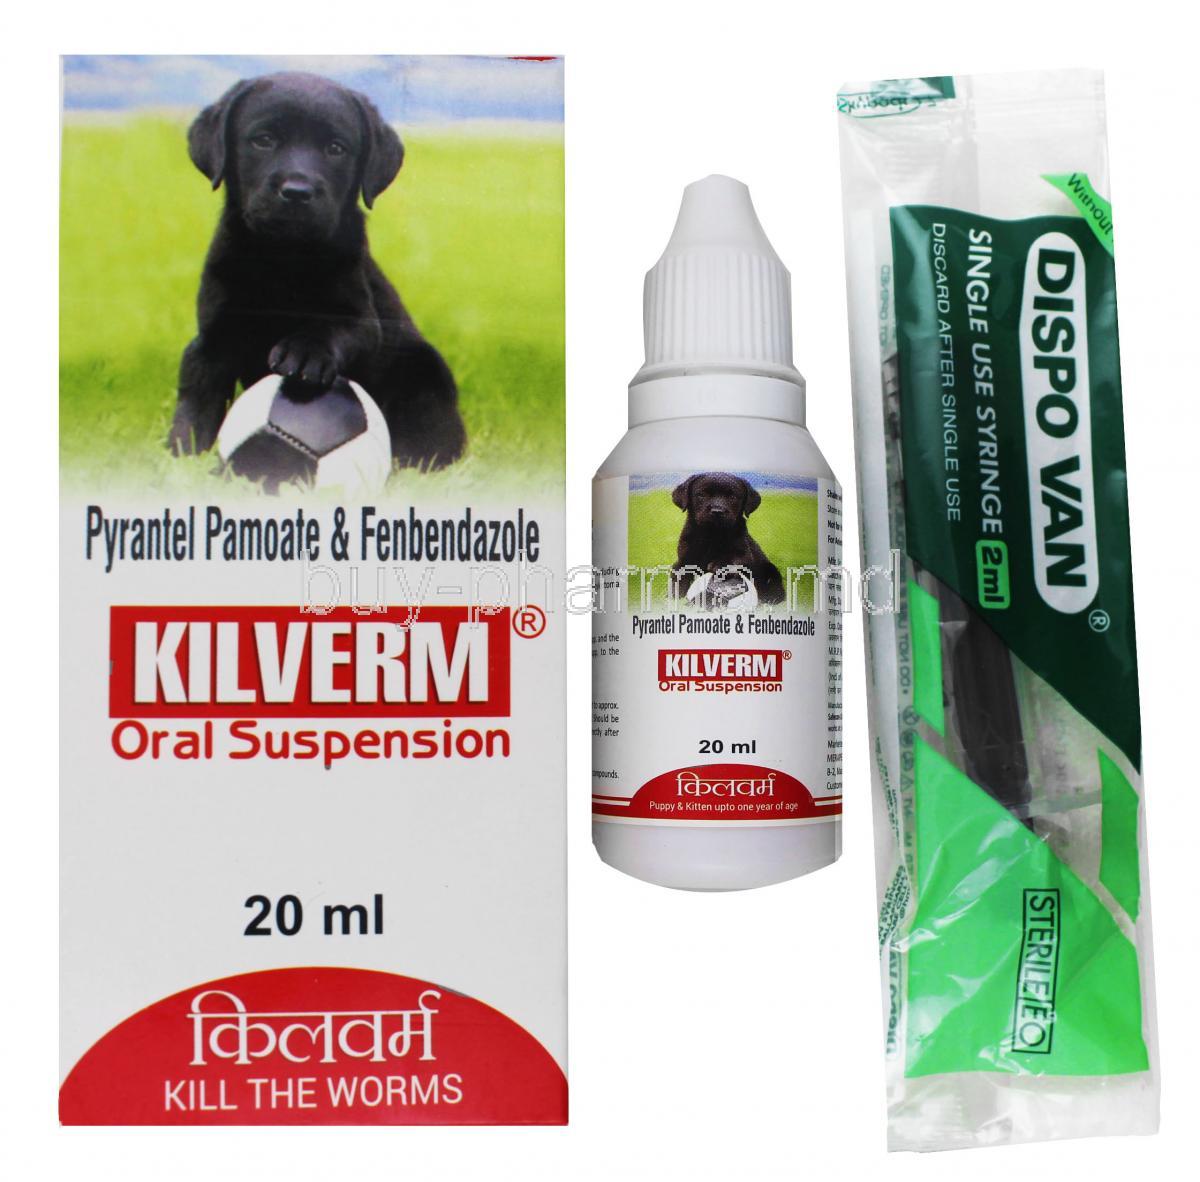 Kilverm Oral Suspension for Dogs, box and bottle